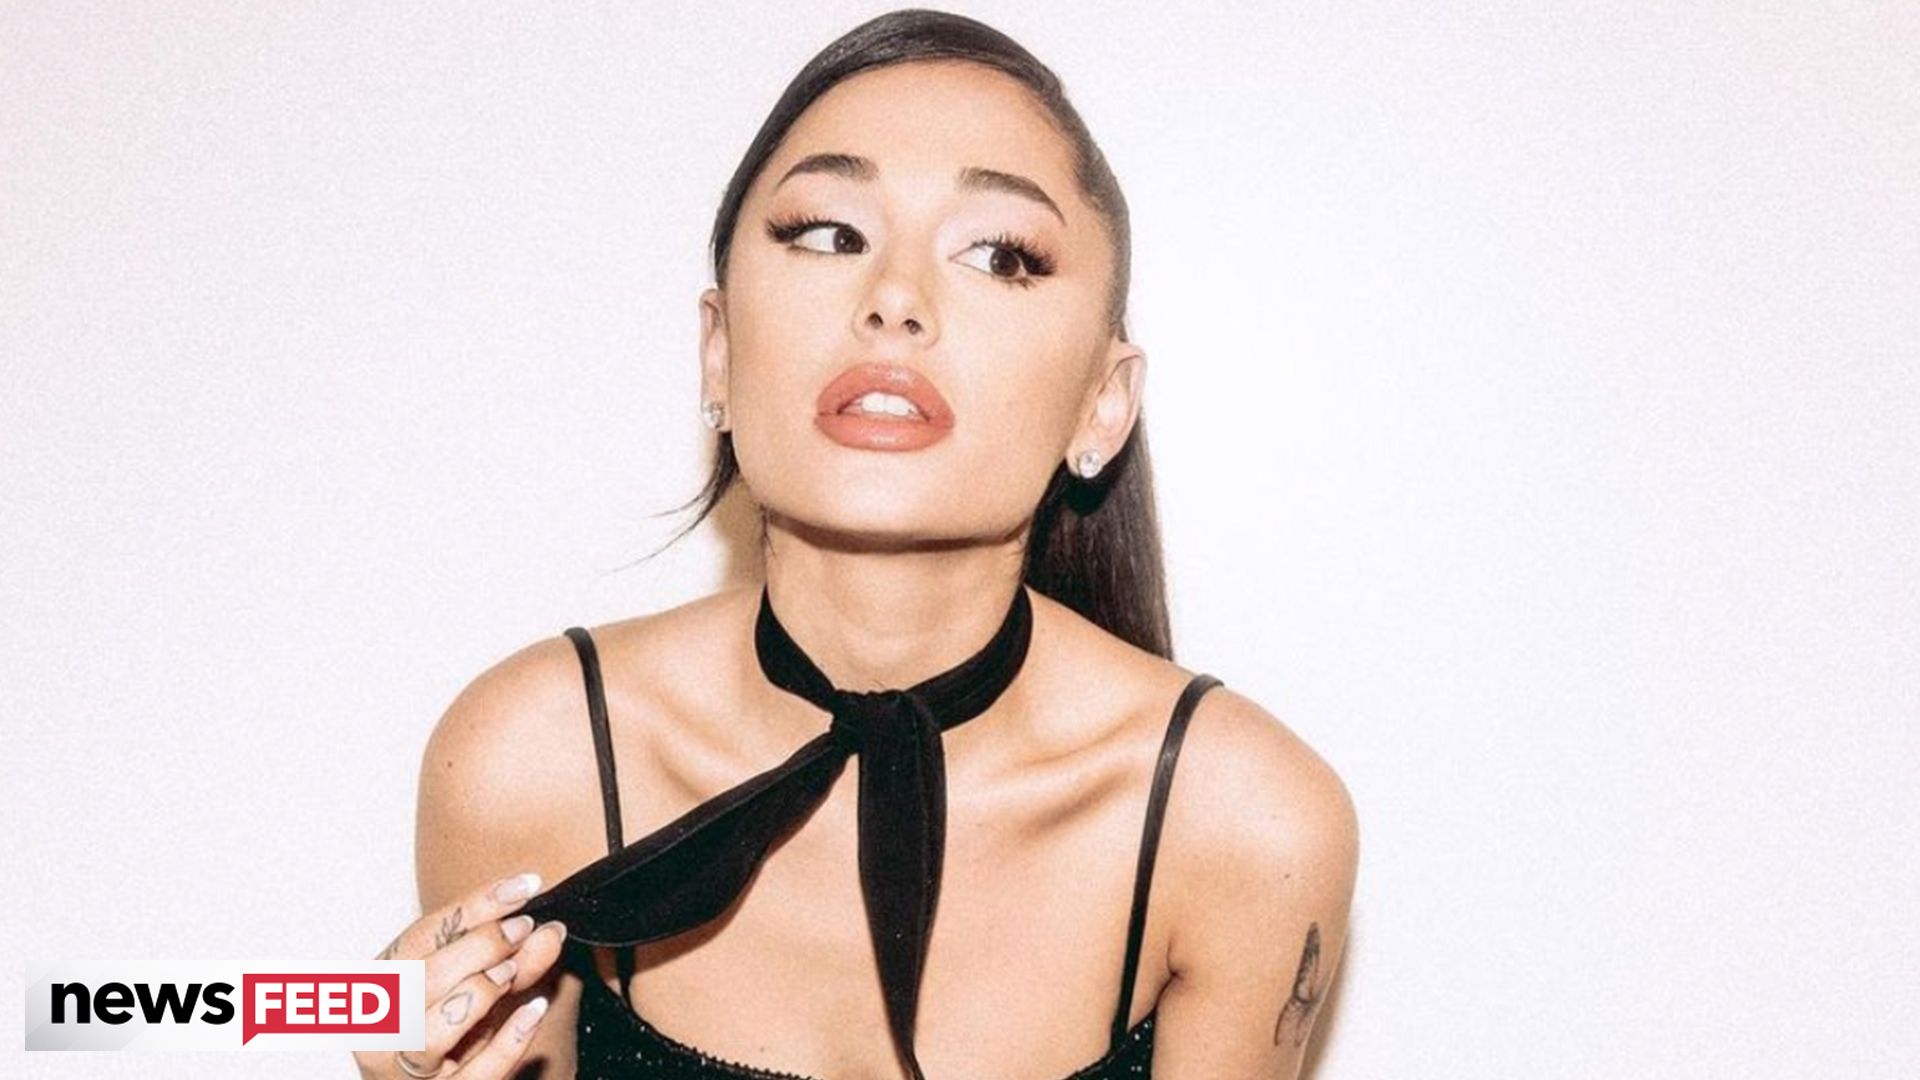 Ariana Grande's Gem-Stoned Cat-Eye Is Nothing Like Her Signature Makeup —  See Photo